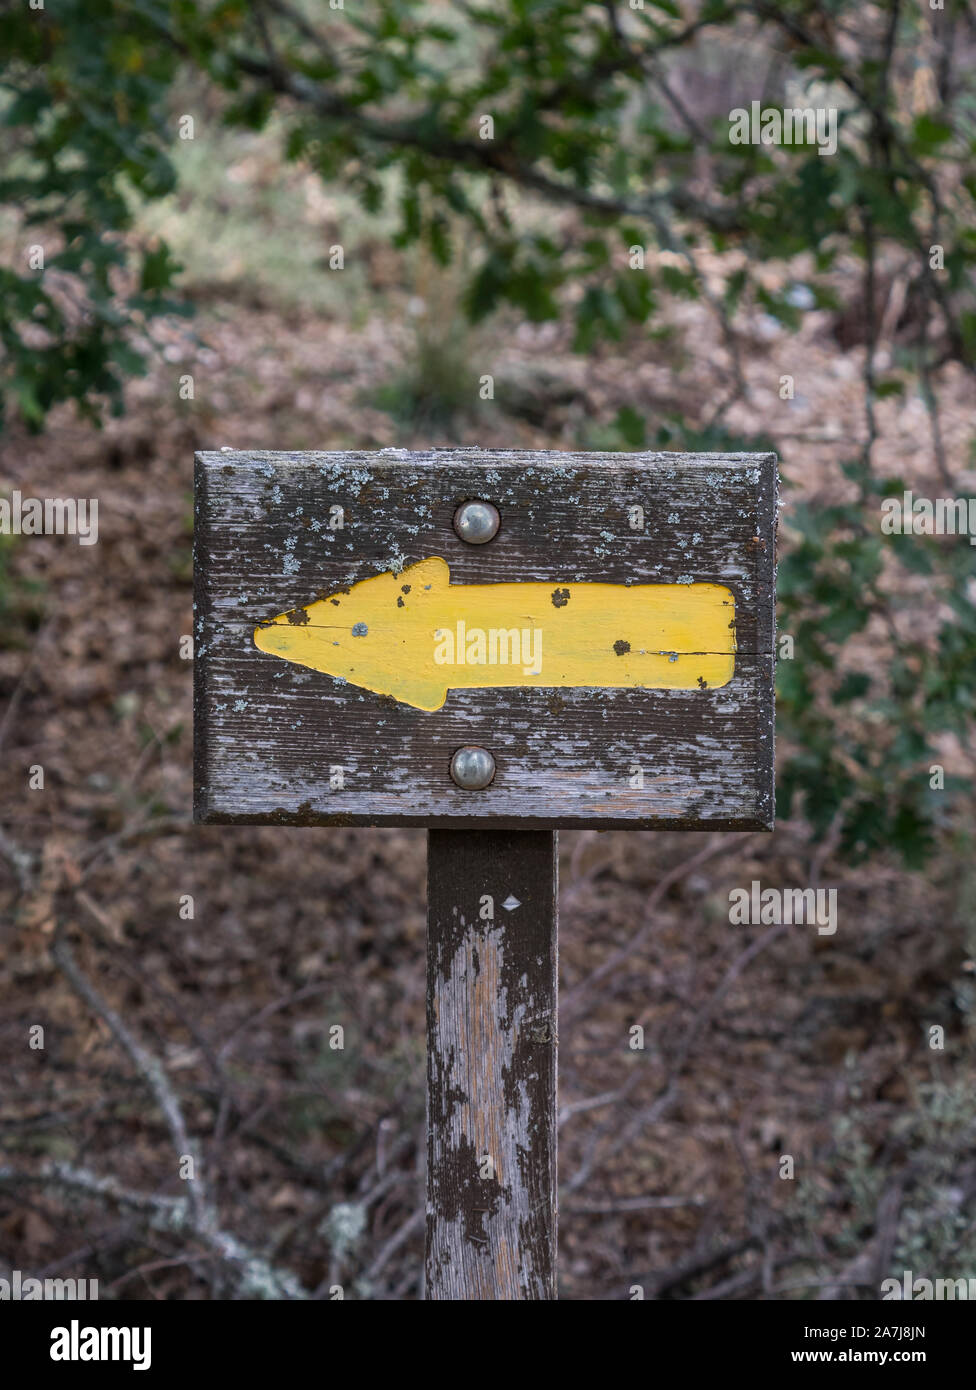 Sign of a 'Camino Tradicional' (traditional trail), a network of trails connecting villages and hamlets of the Sanabria area in Zamora, Spain Stock Photo